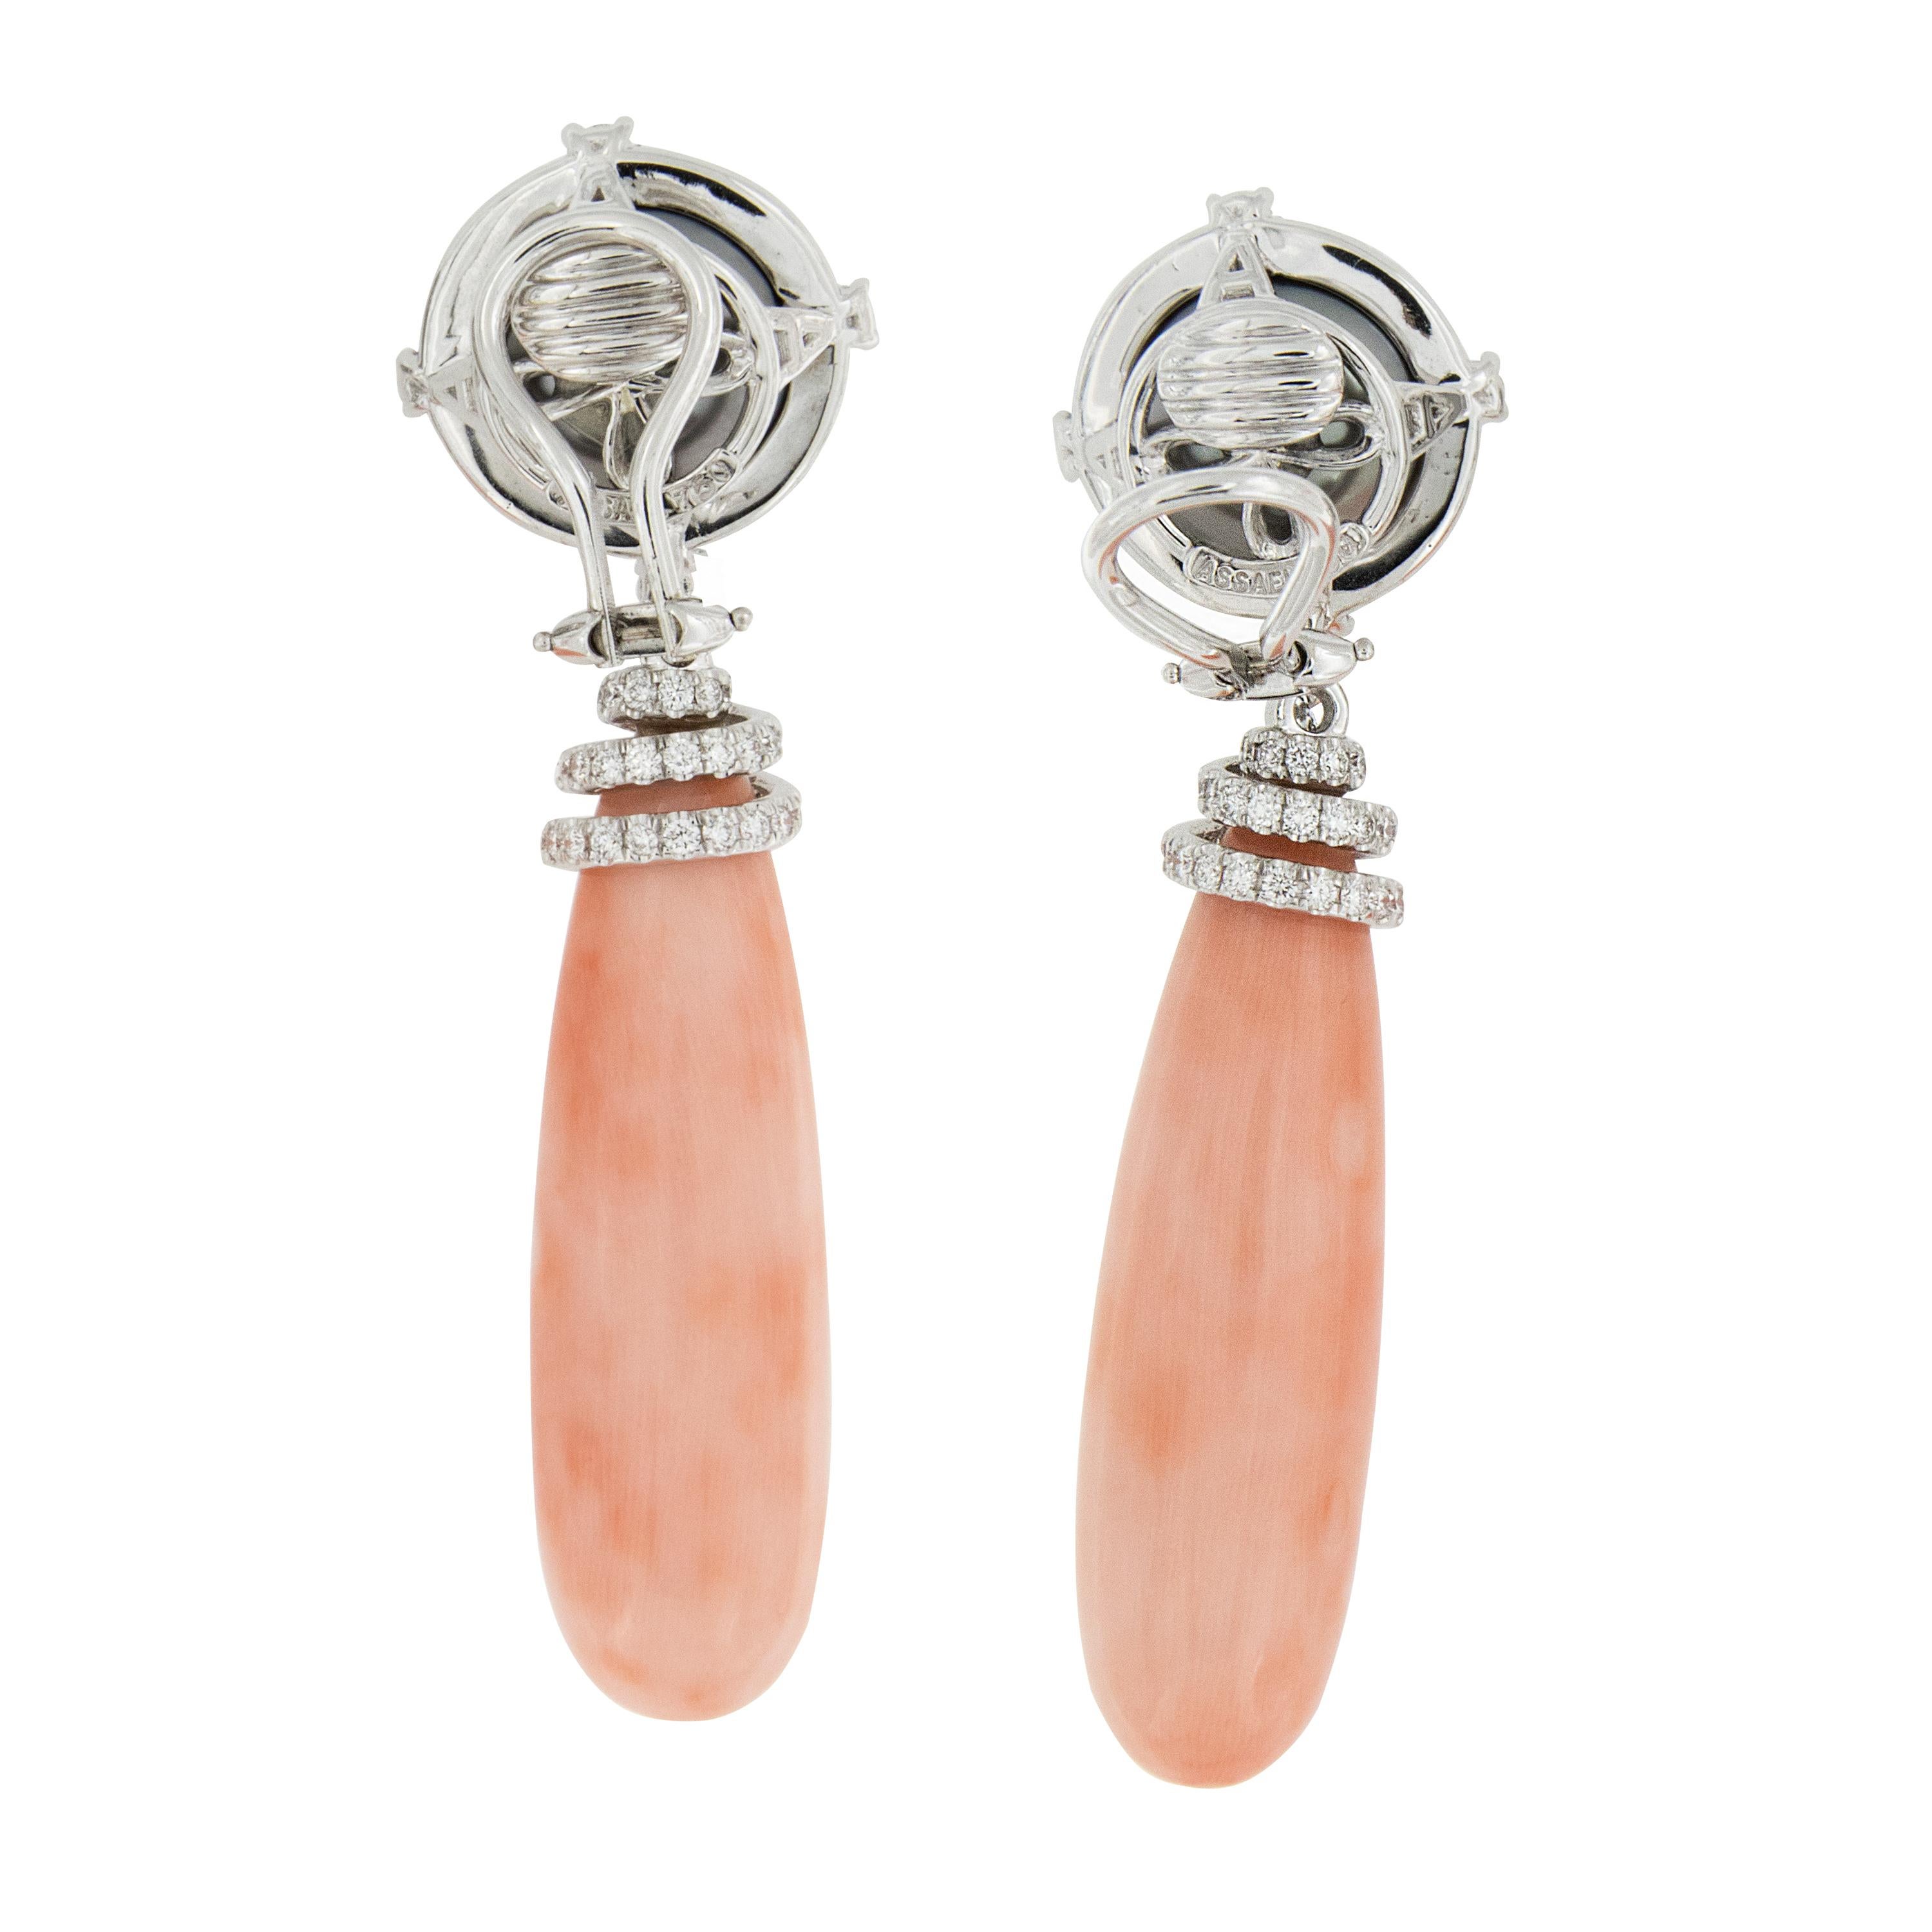 Art Deco 18 Karat White Gold Angelskin Coral and Tahitian Gray Pearl Earrings by Assael